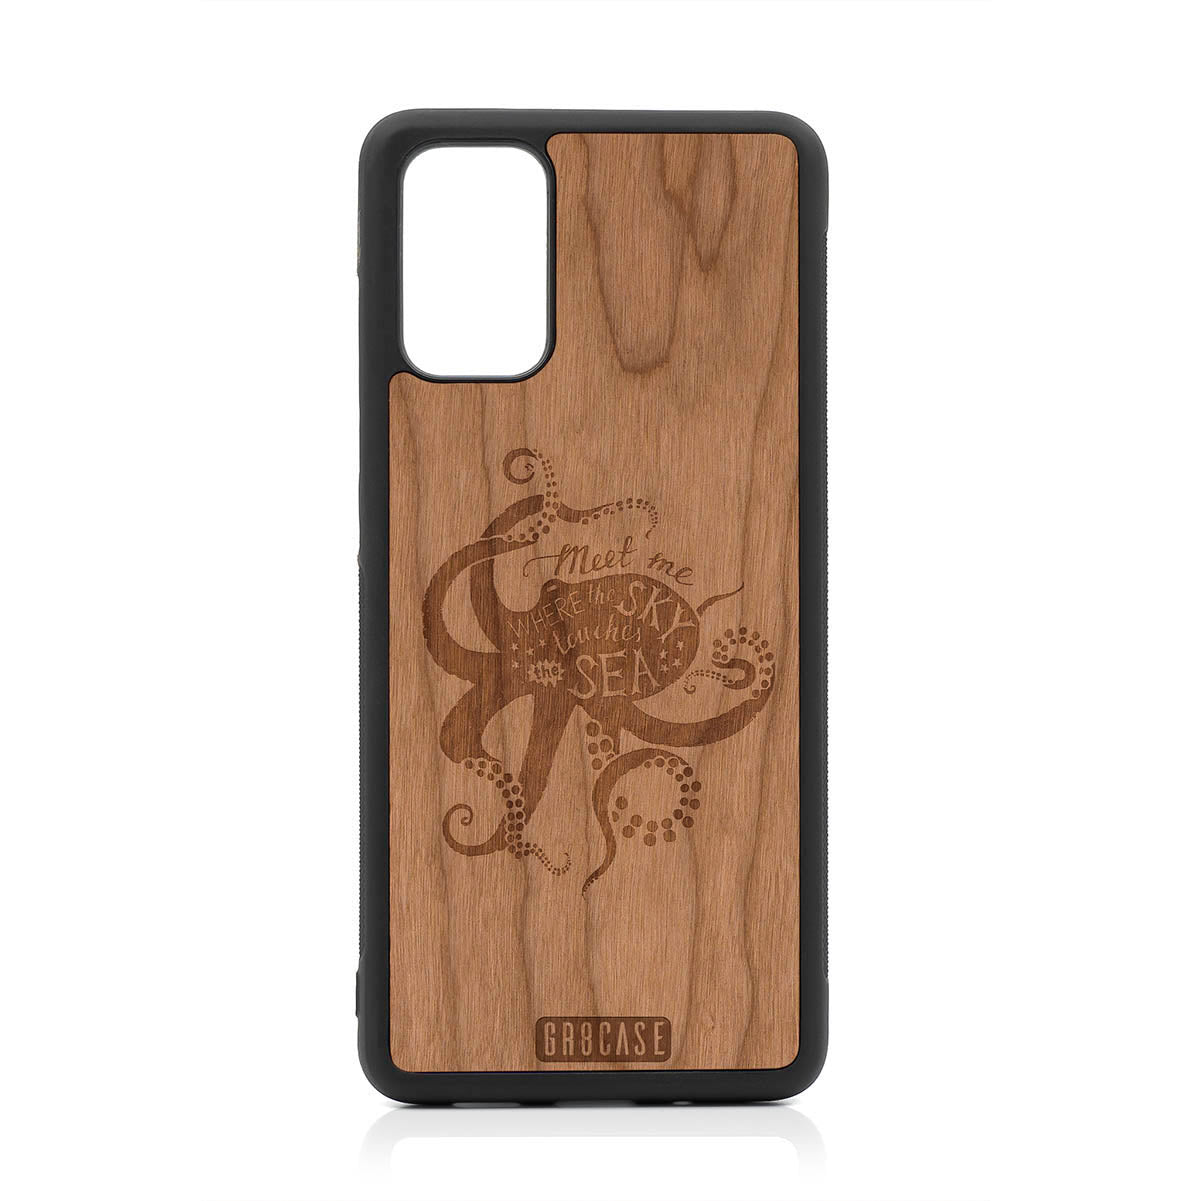 Meet Me Where The Sky Touches The Sea (Octopus) Design Wood Case For Samsung Galaxy S20 Plus